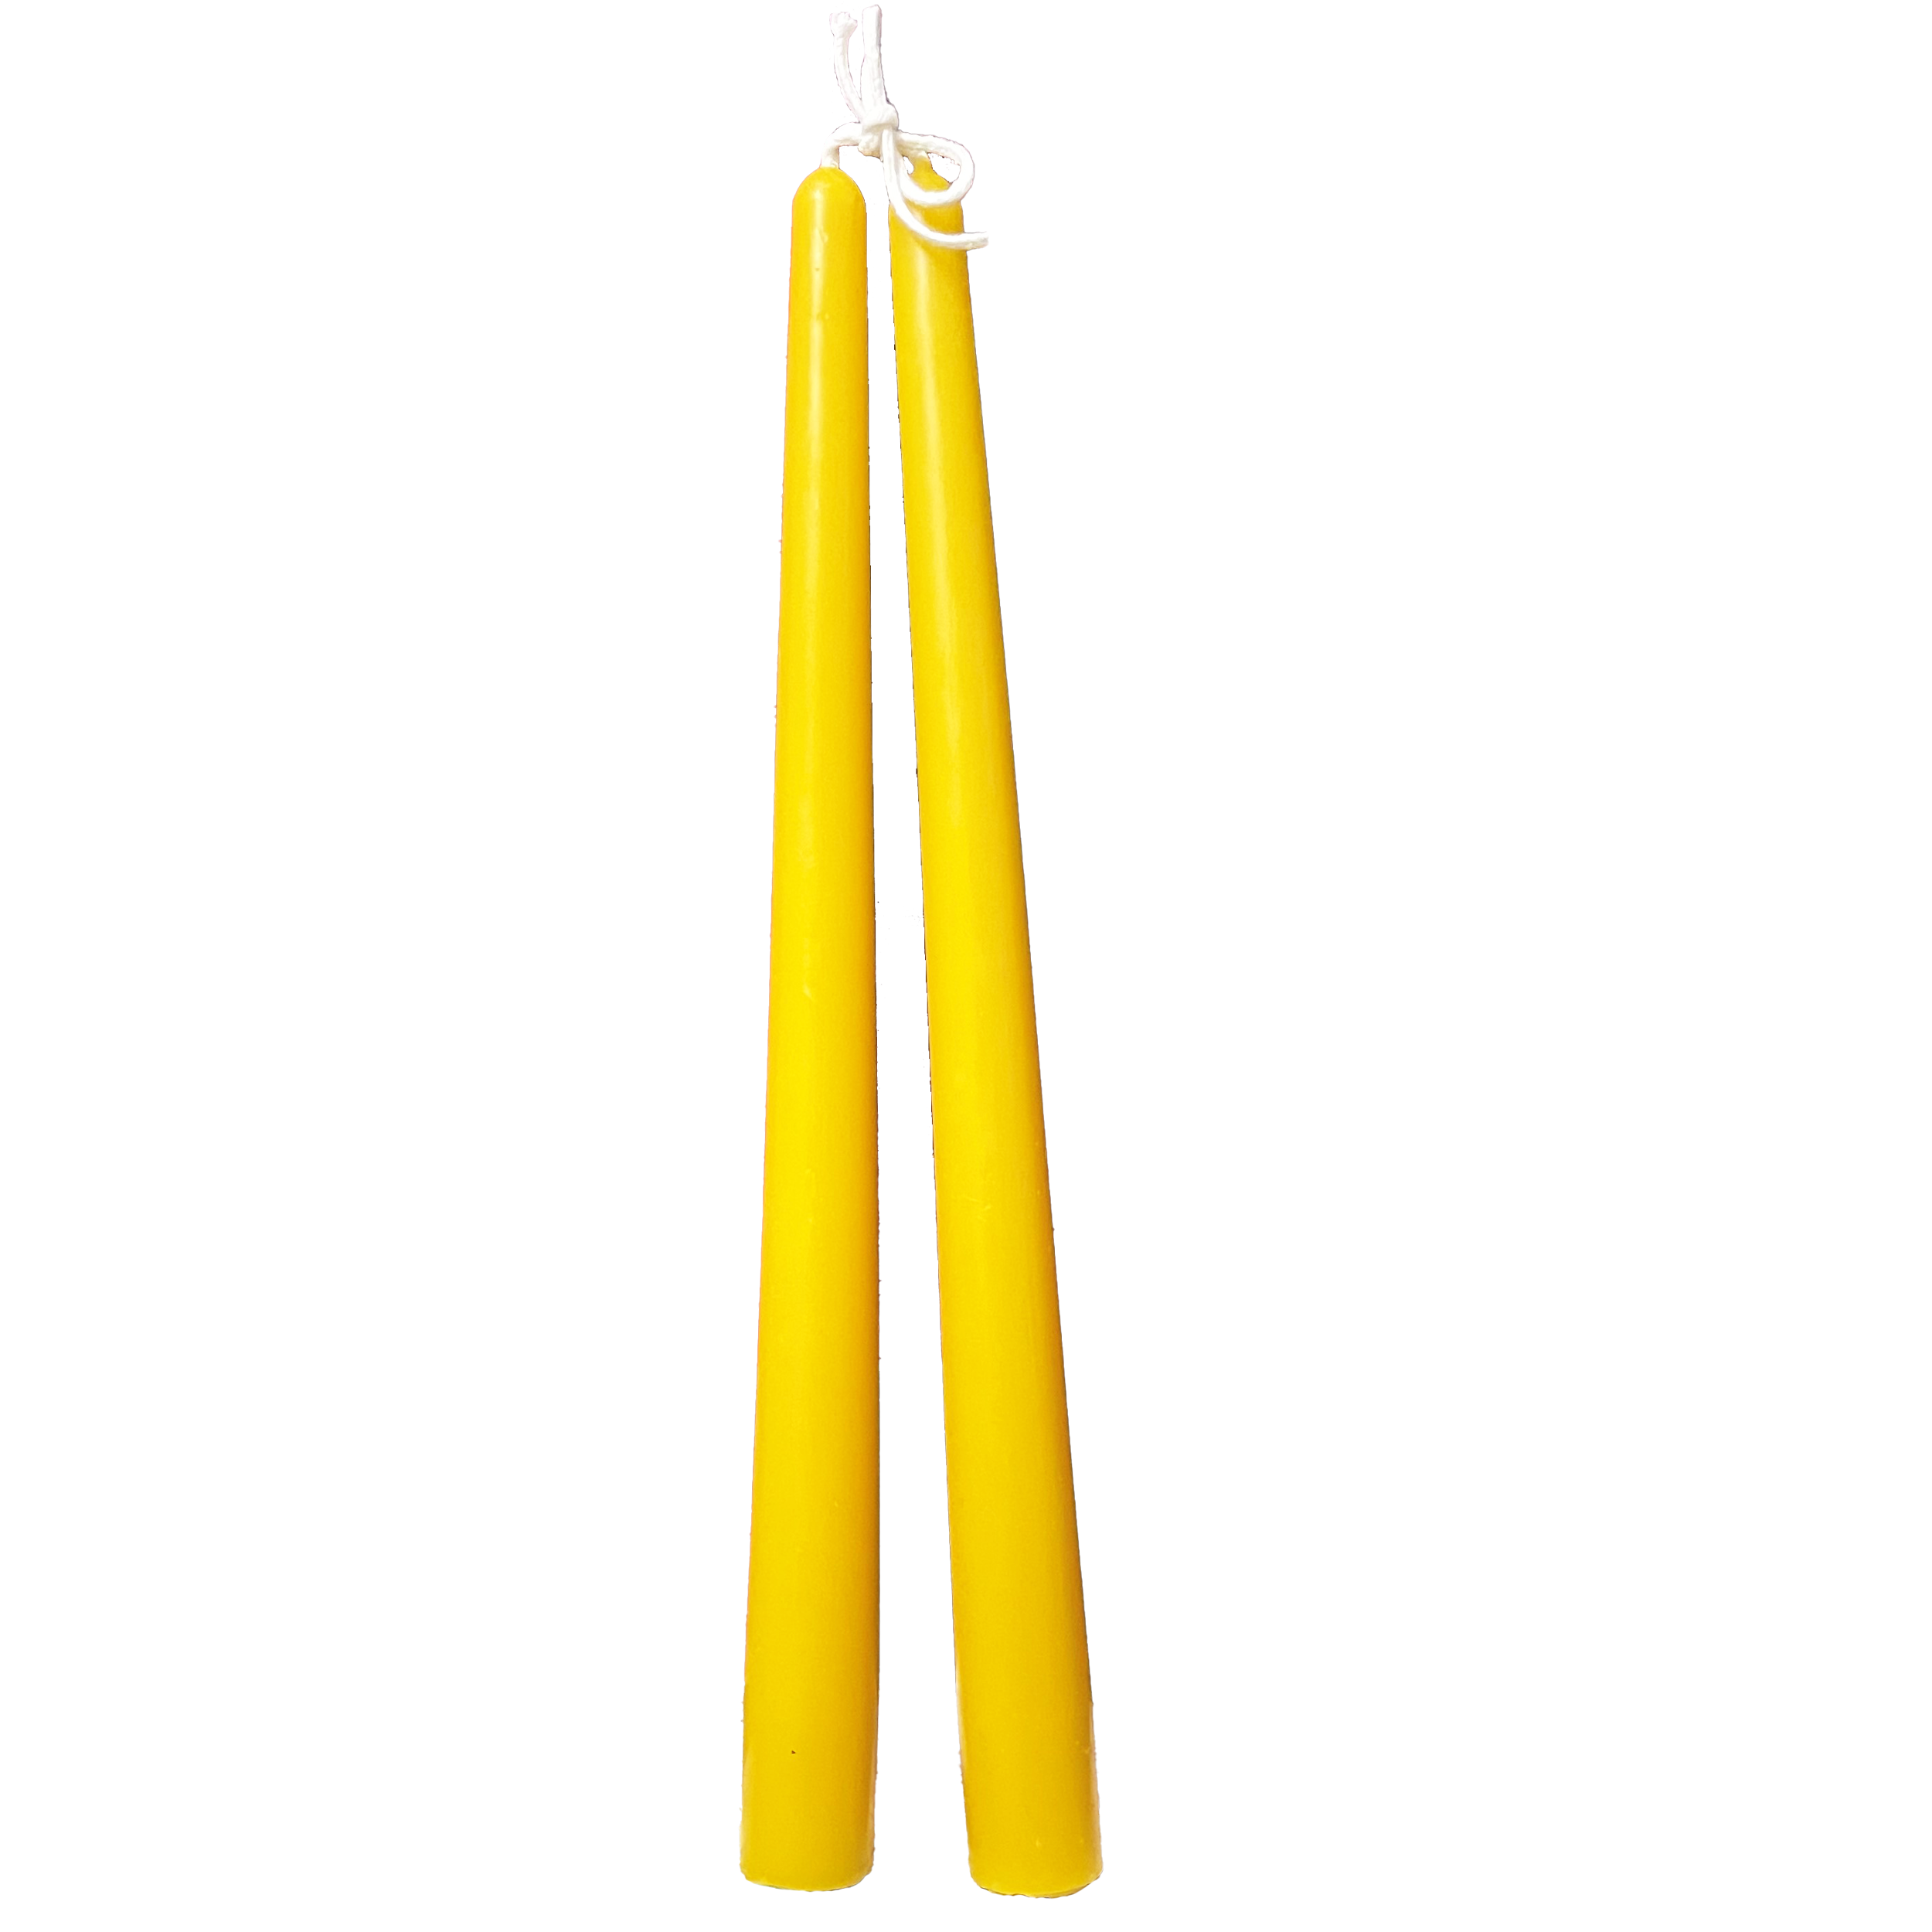 100% natural beeswax taper candles